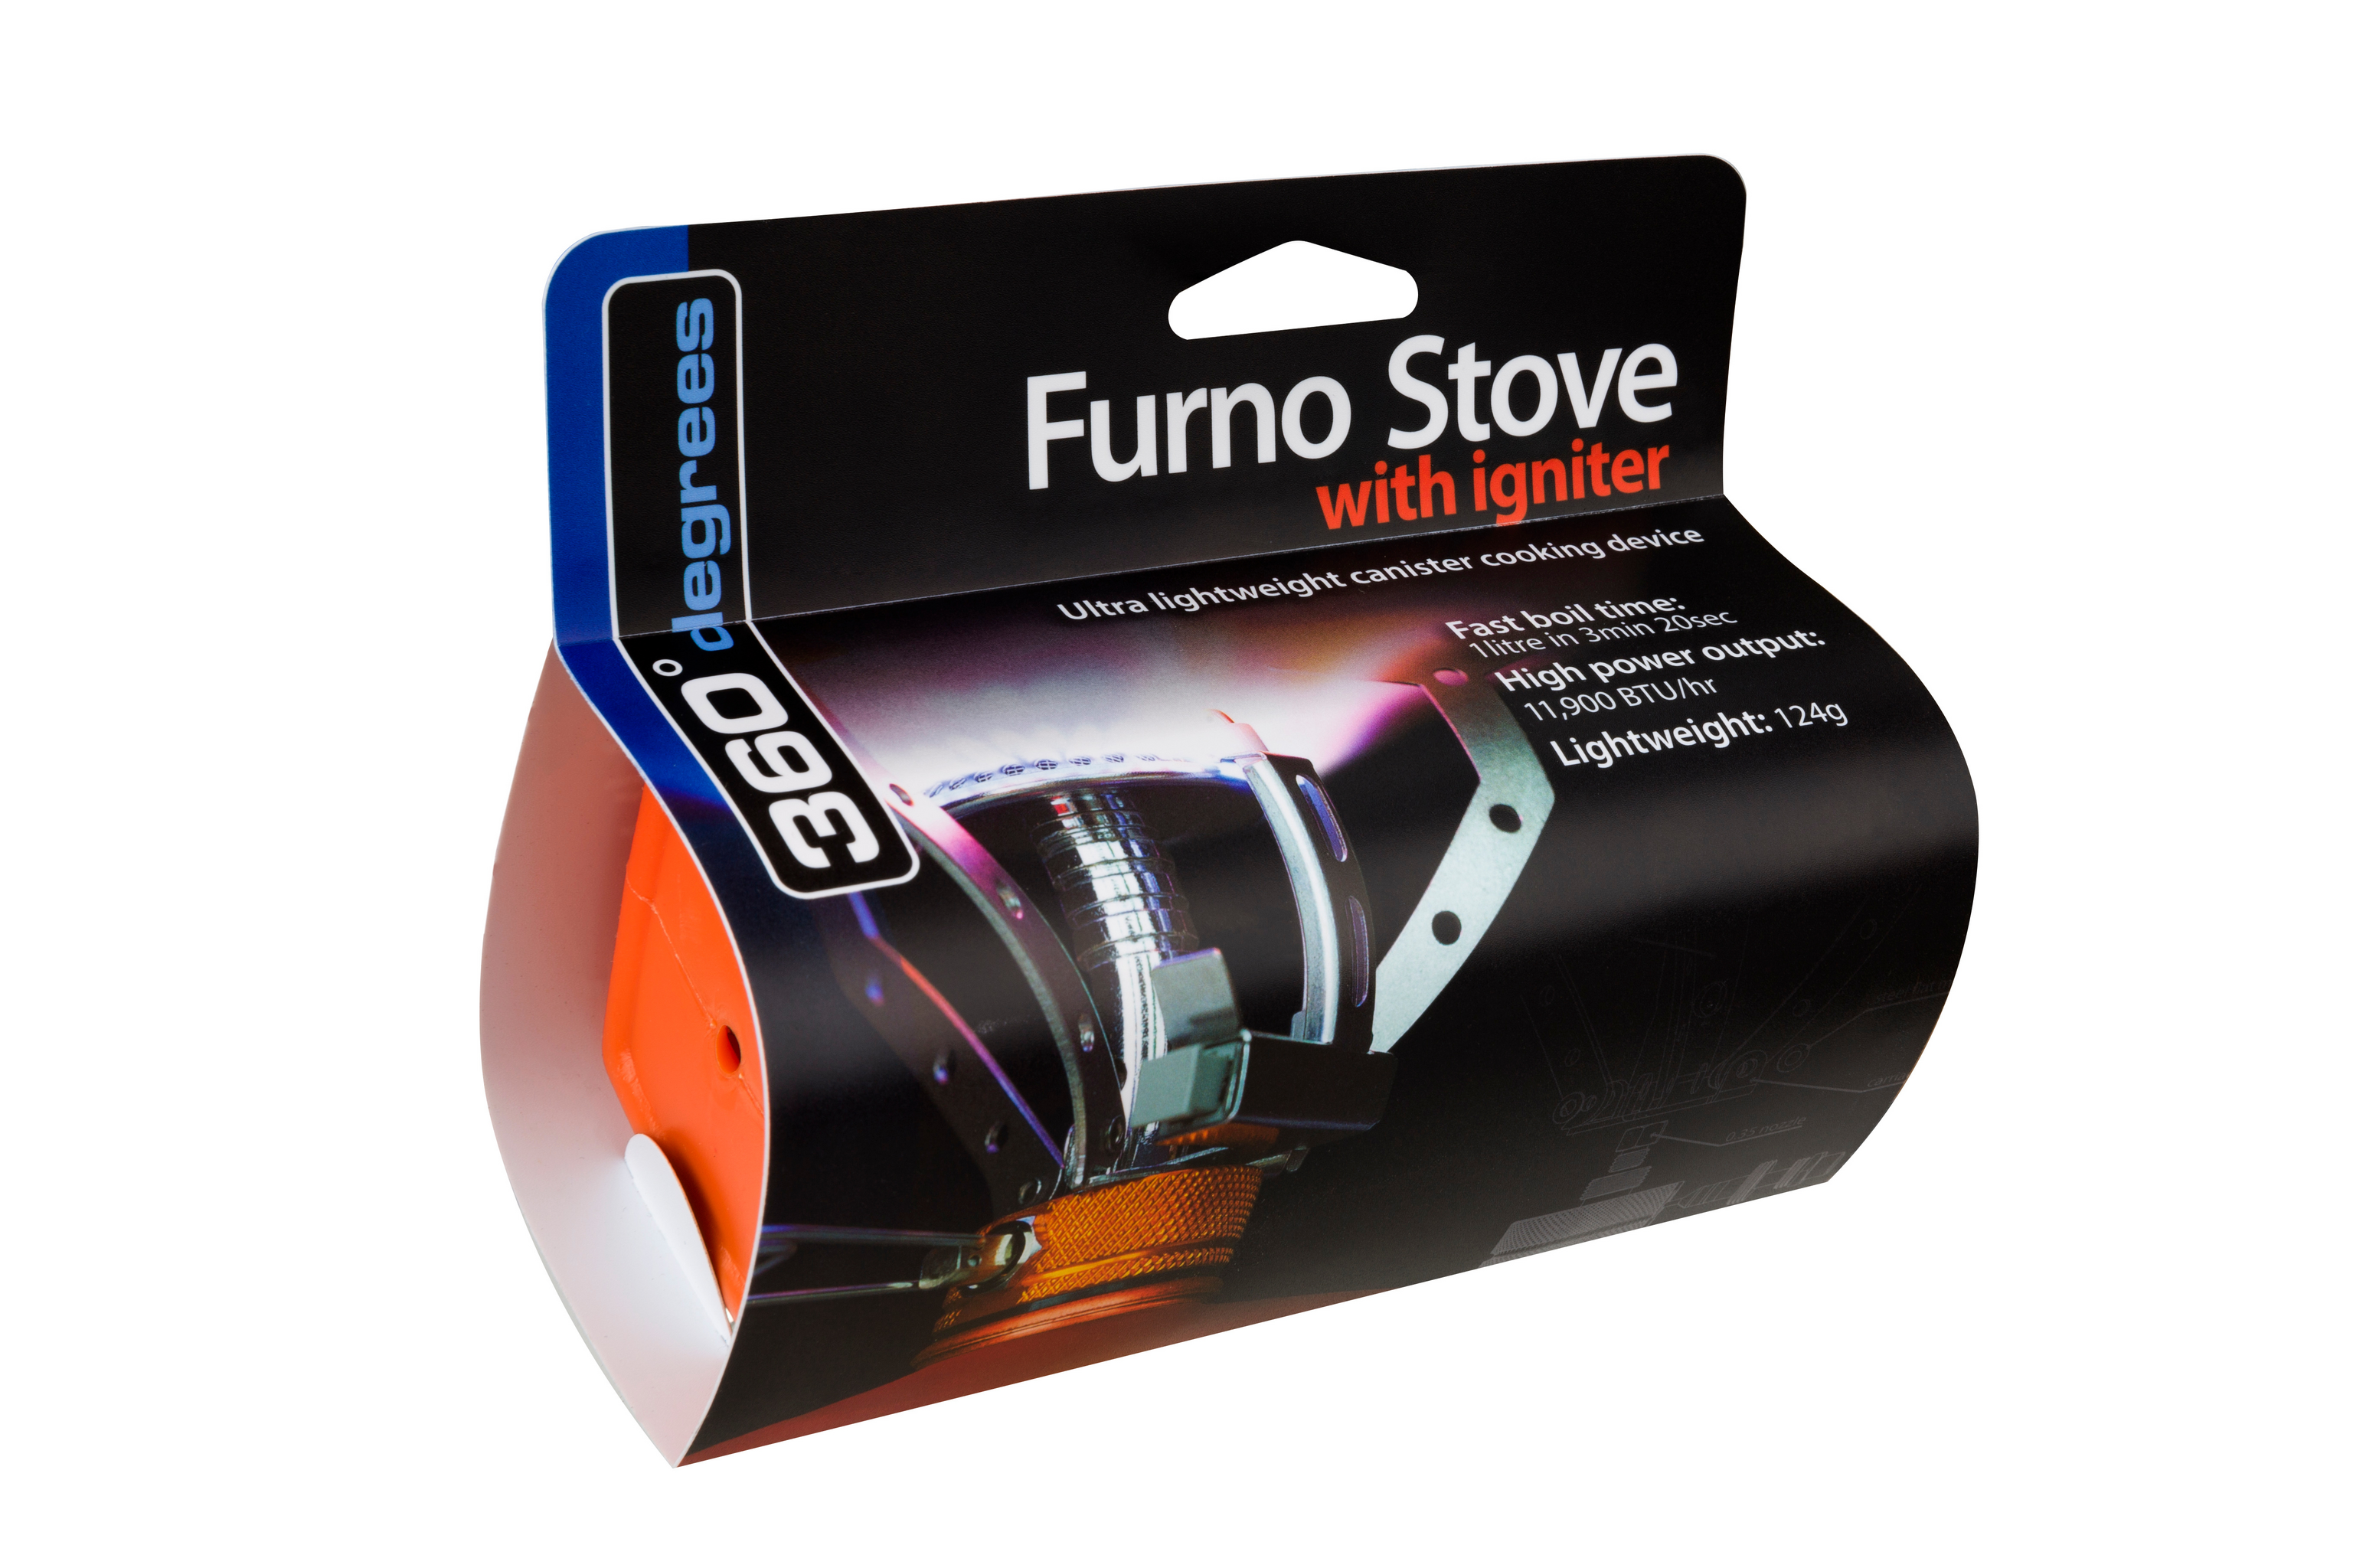 360° Furno Stove with igniter gas cooker